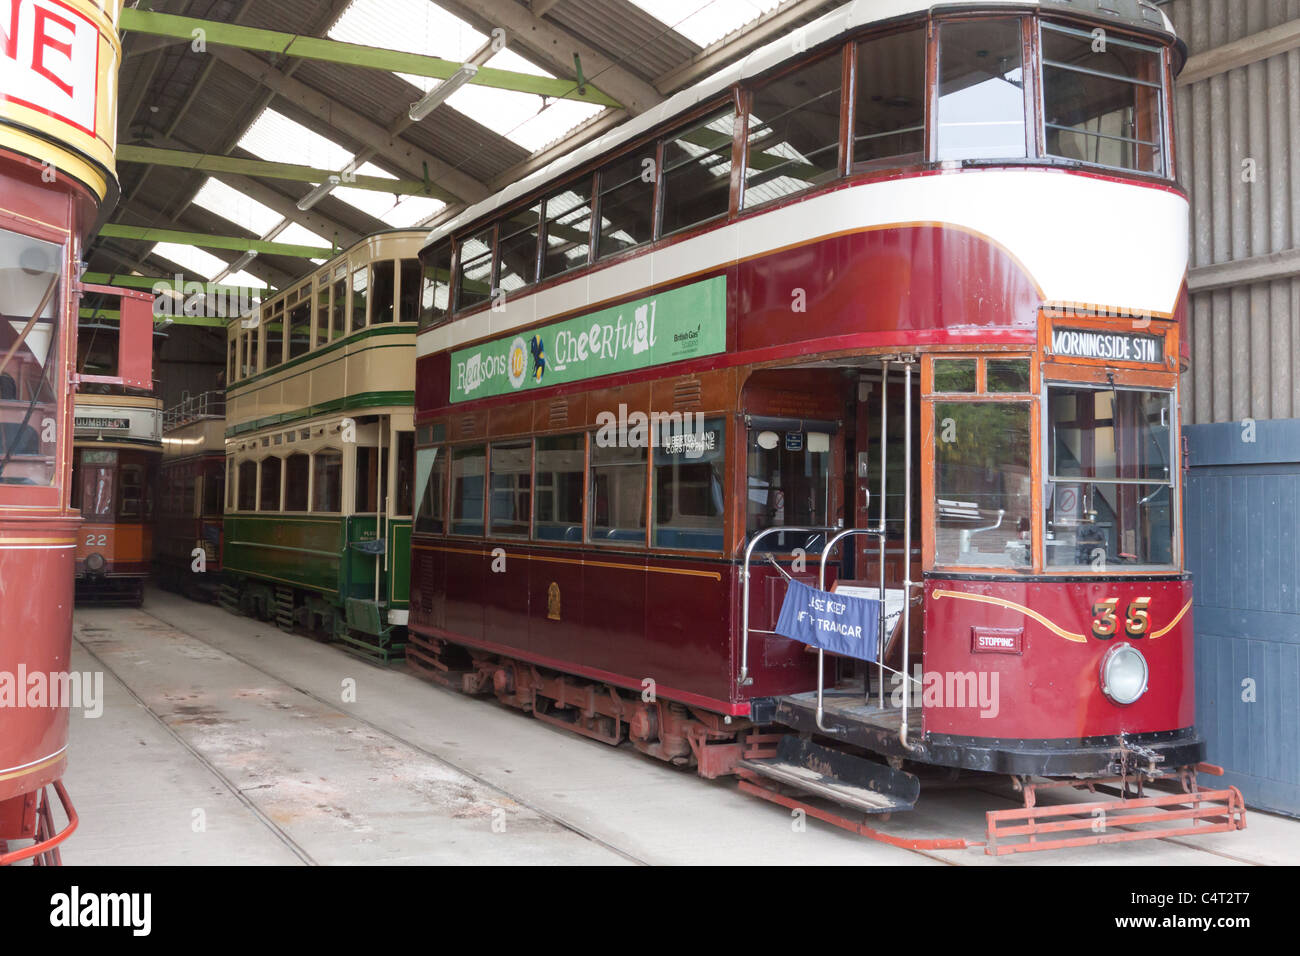 Trams lined up int he tram shed Stock Photo